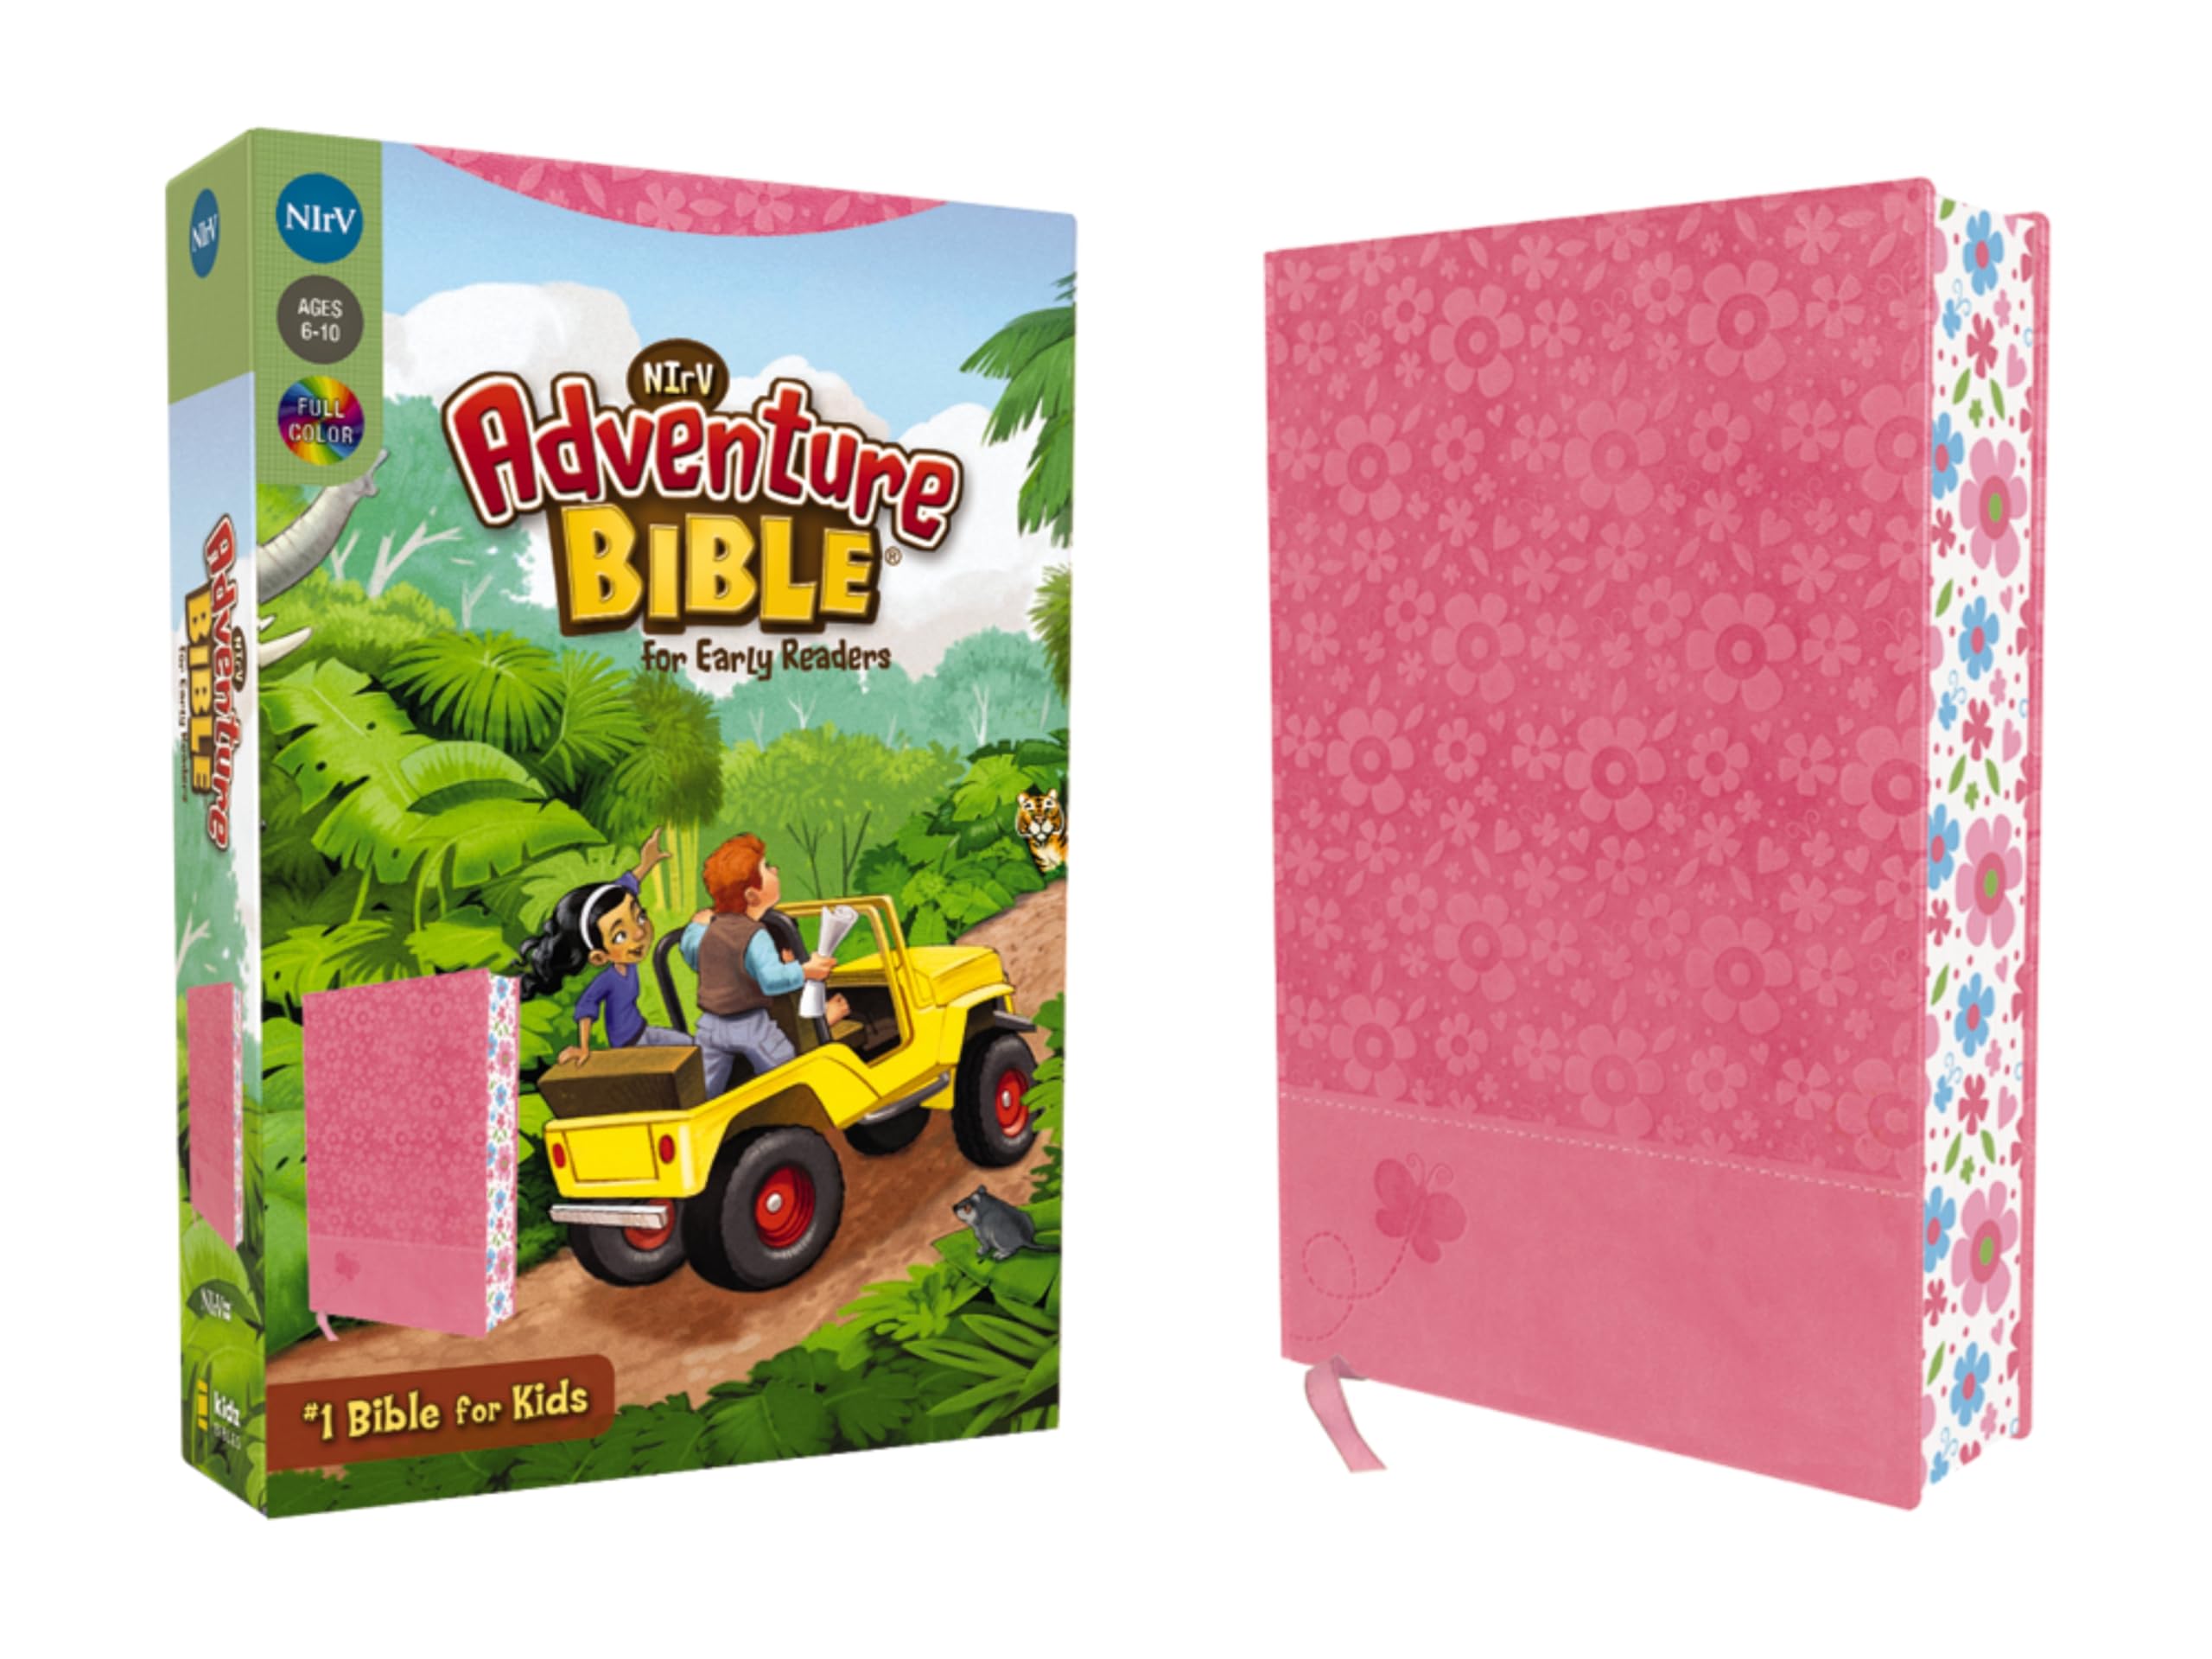 Adventure Bible for Early Readers-NIRV by Richards, Lawrence O.